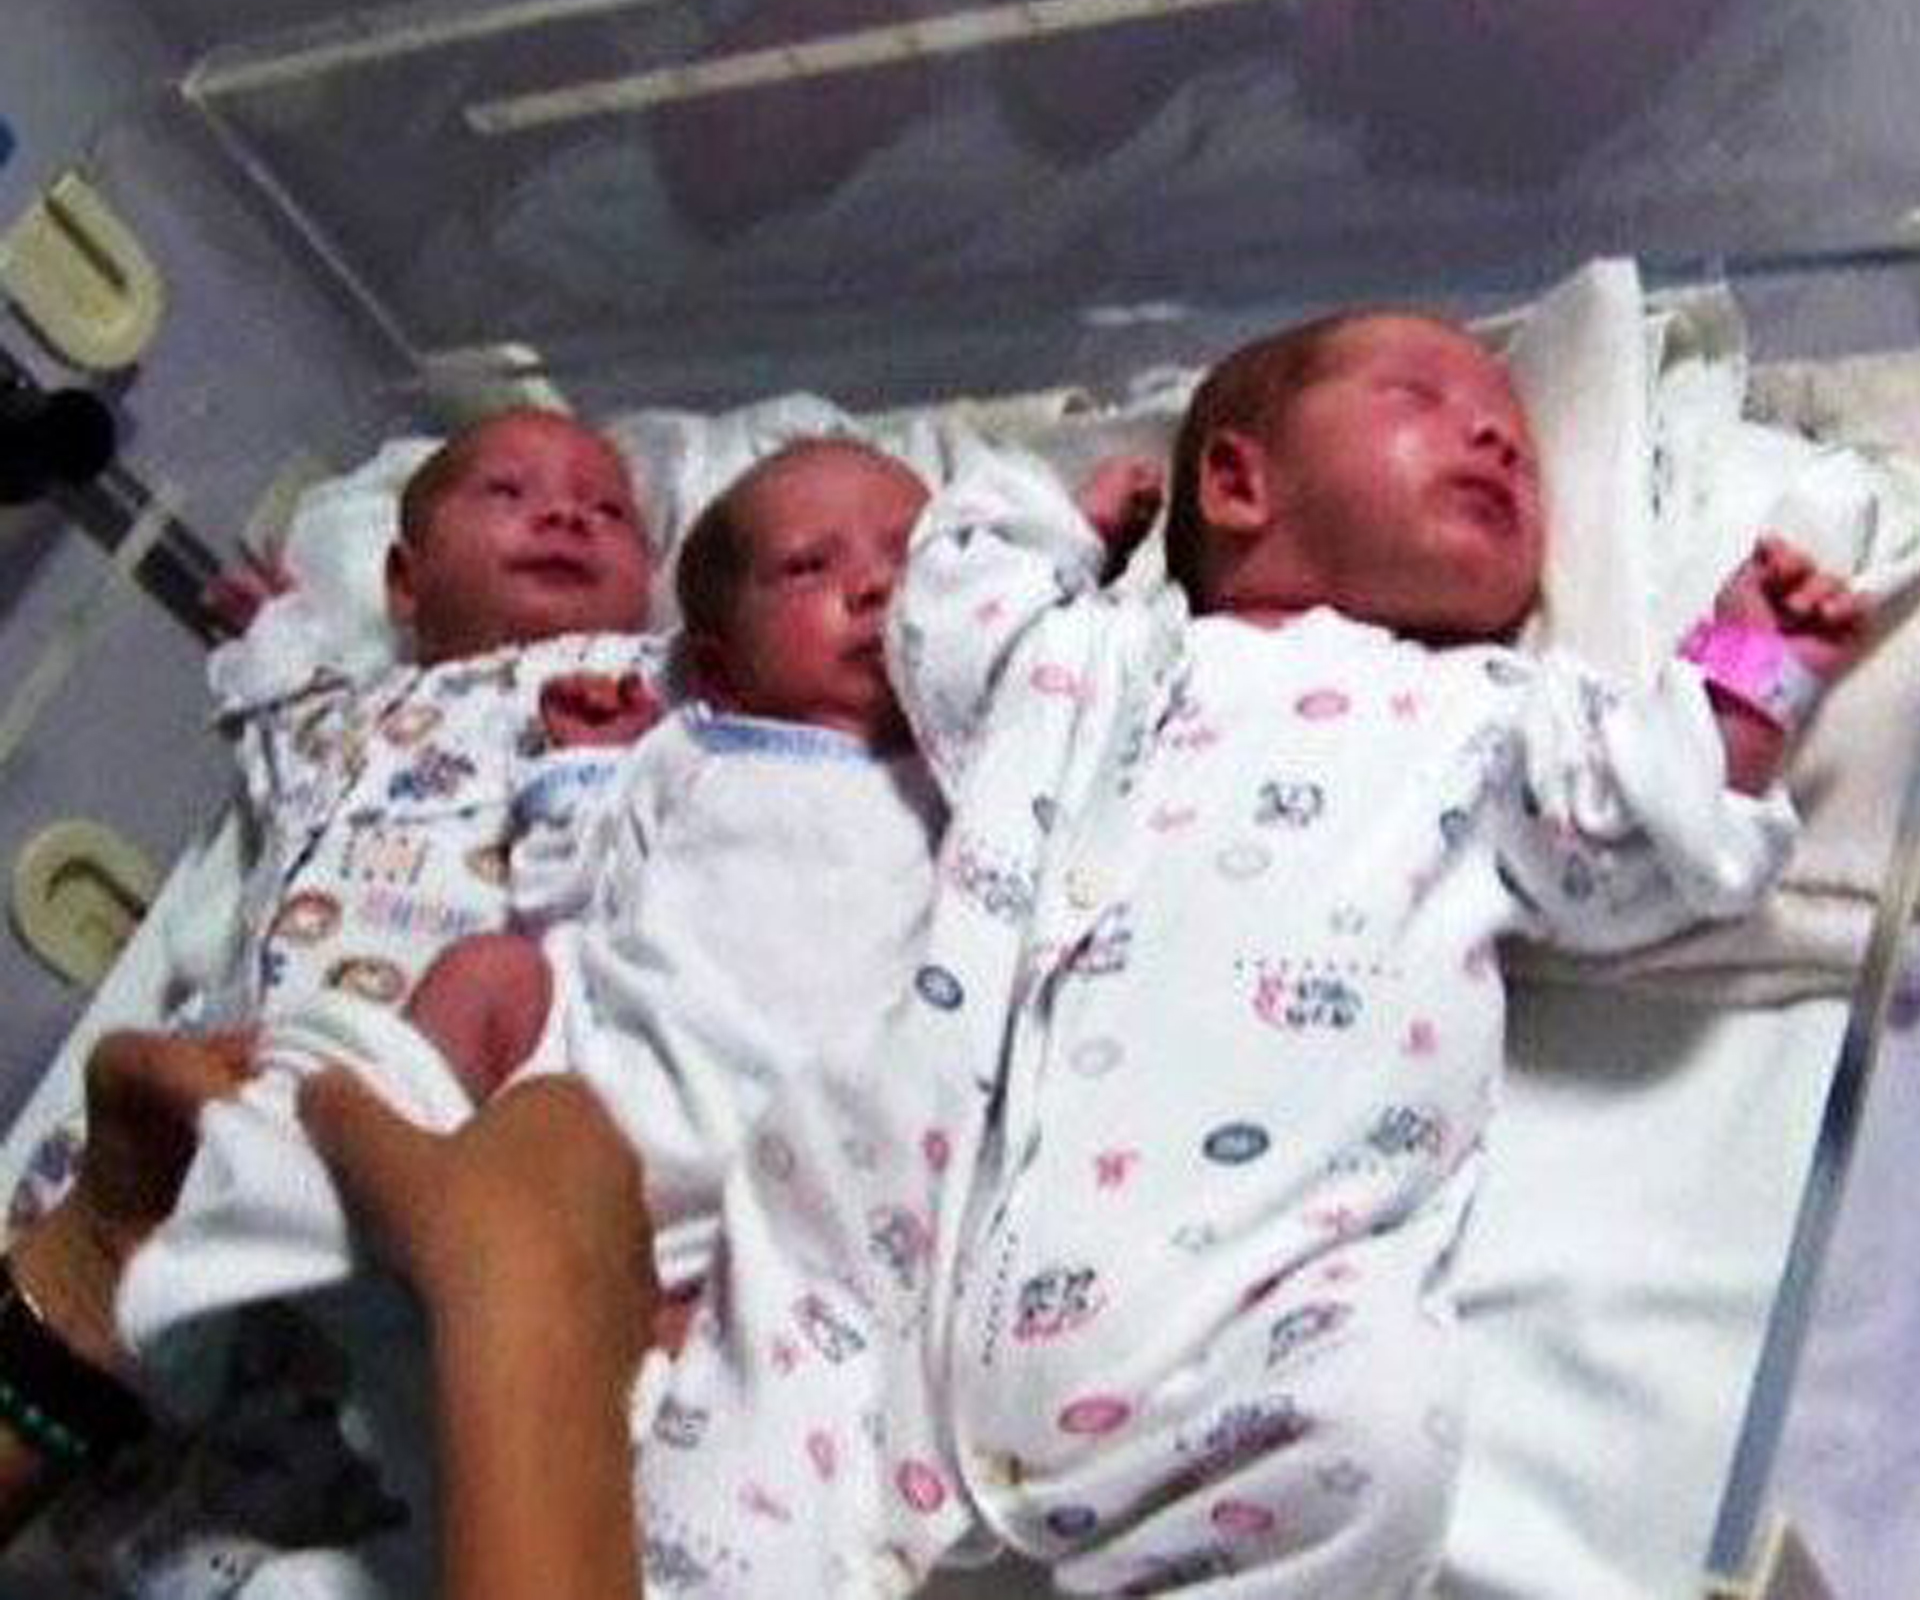 Romanian mother leaves triplets at hospital